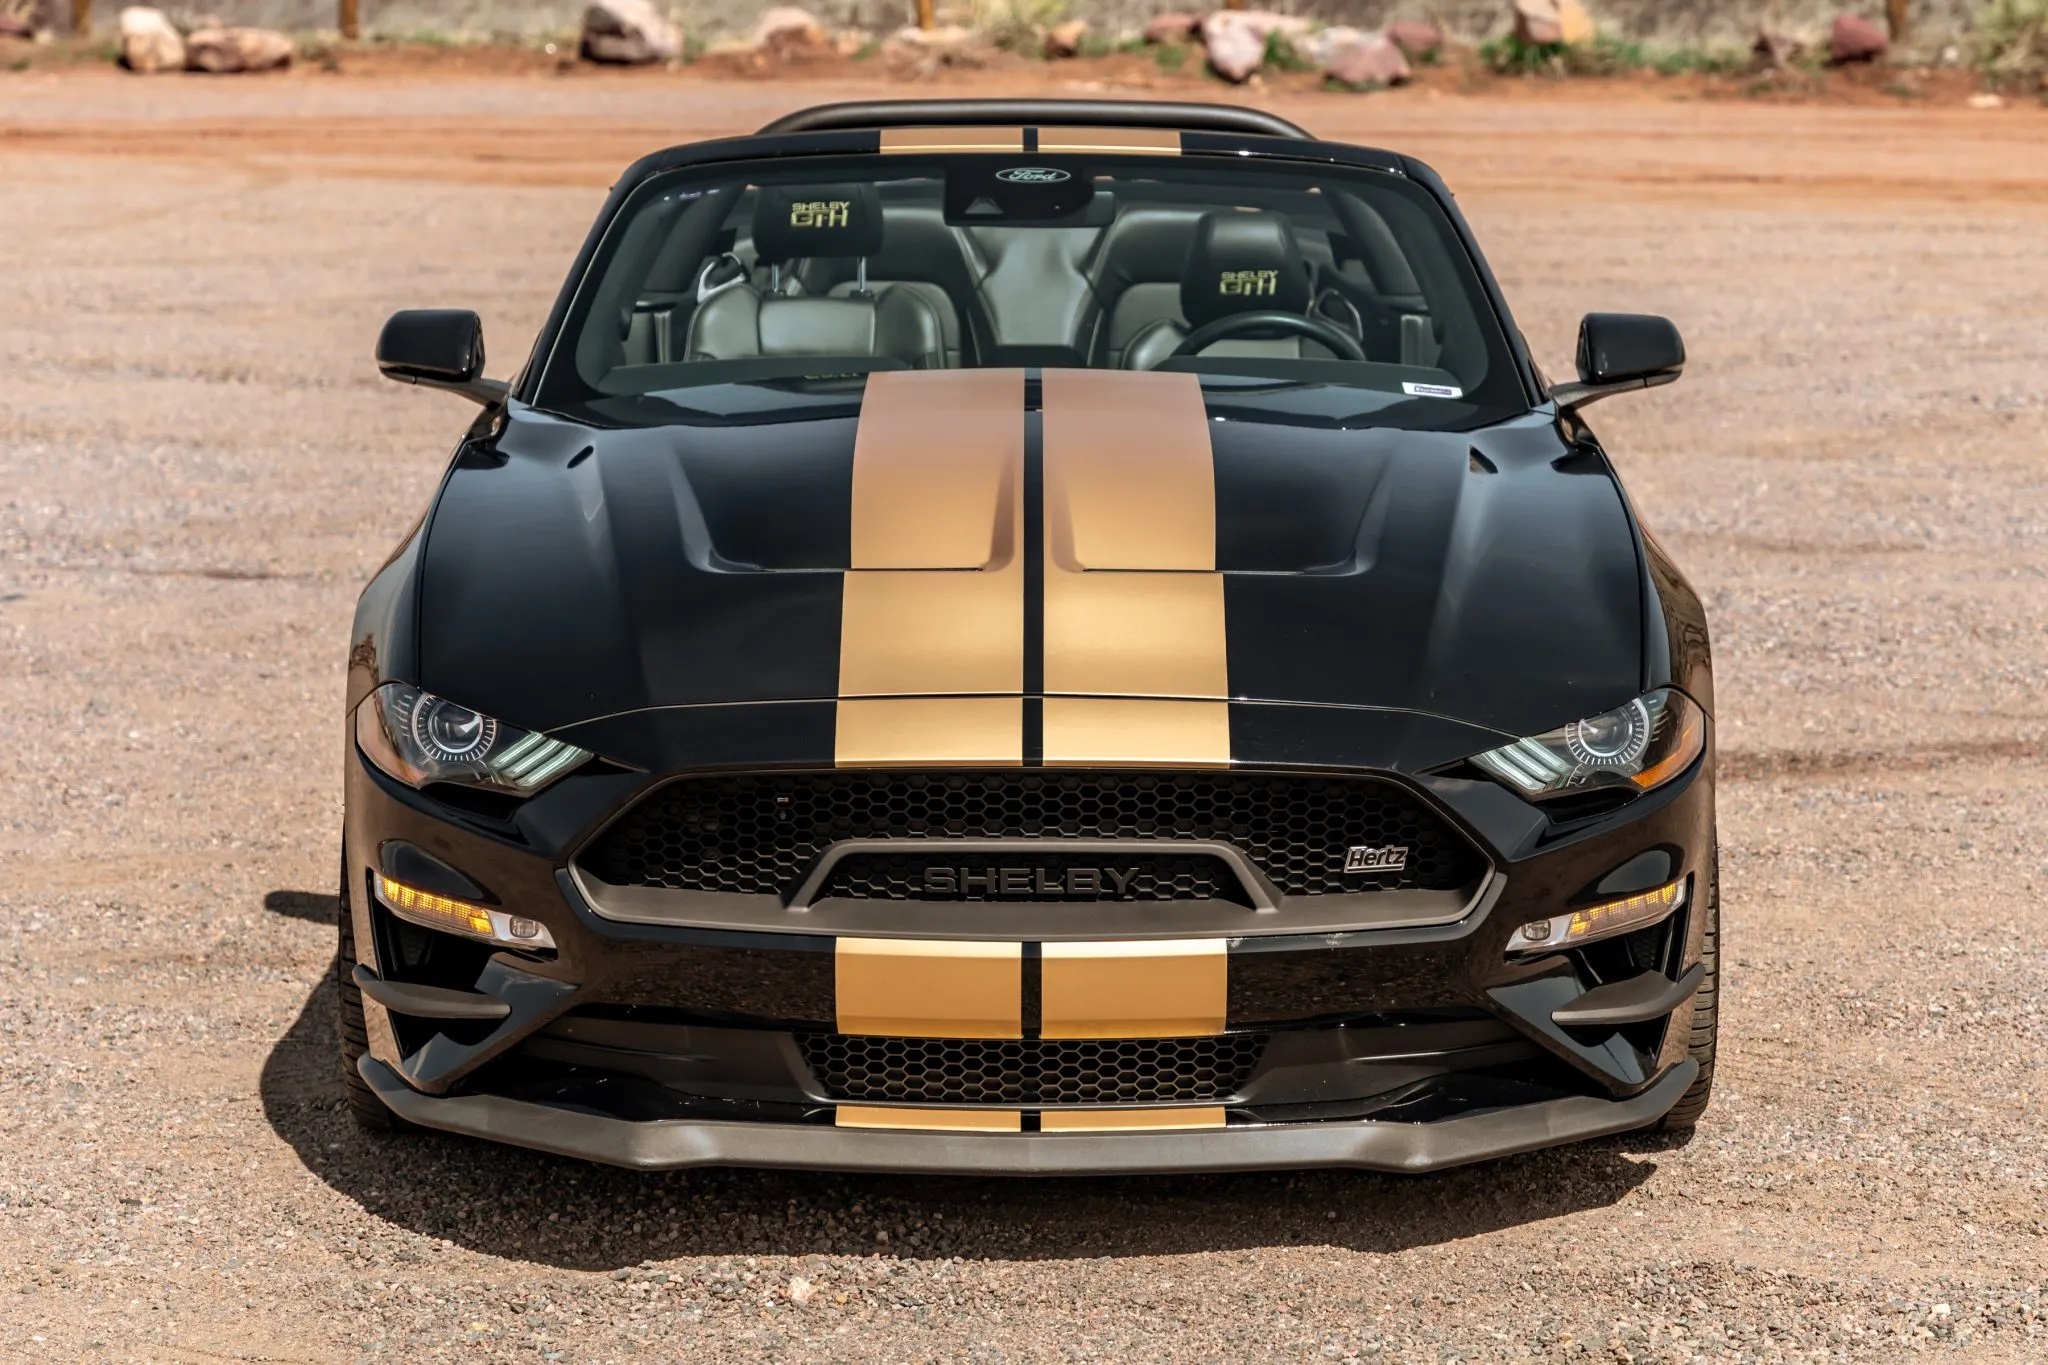 Supercharged 2022 Ford Mustang Shelby GT-H Convertible For Sale At Bring A Trailer